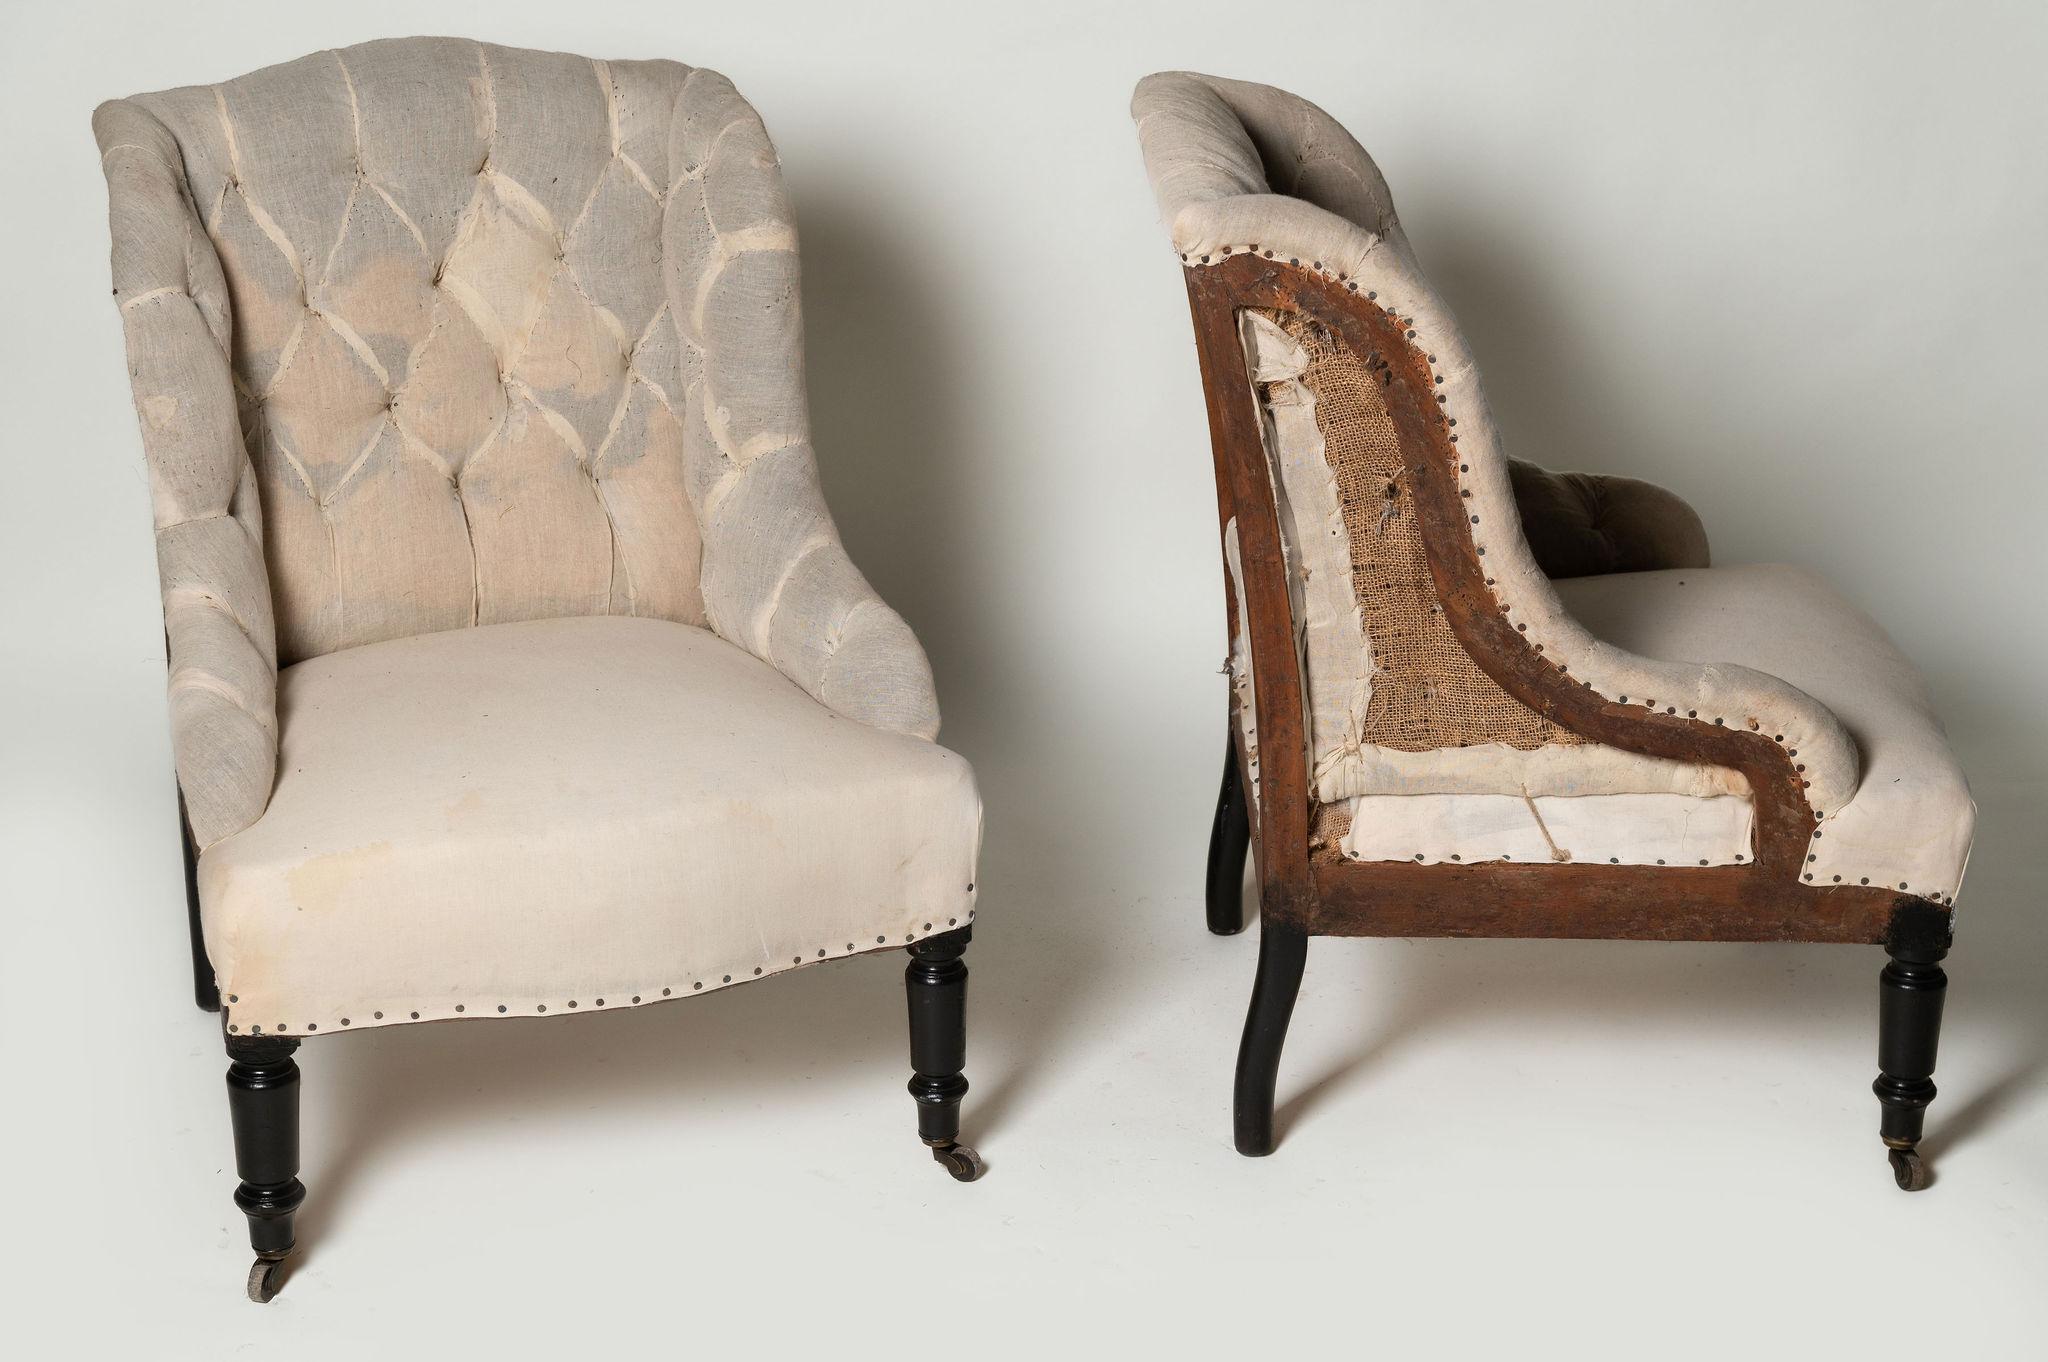 Small pair of antique French chairs, perfect size for any space. Ideal fireside, bedroom chairs or occasional seating. Unusual shape. Your upholsterer could upholster them with or without the buttons. Seat depth 18.5 inches.

Width: 23 